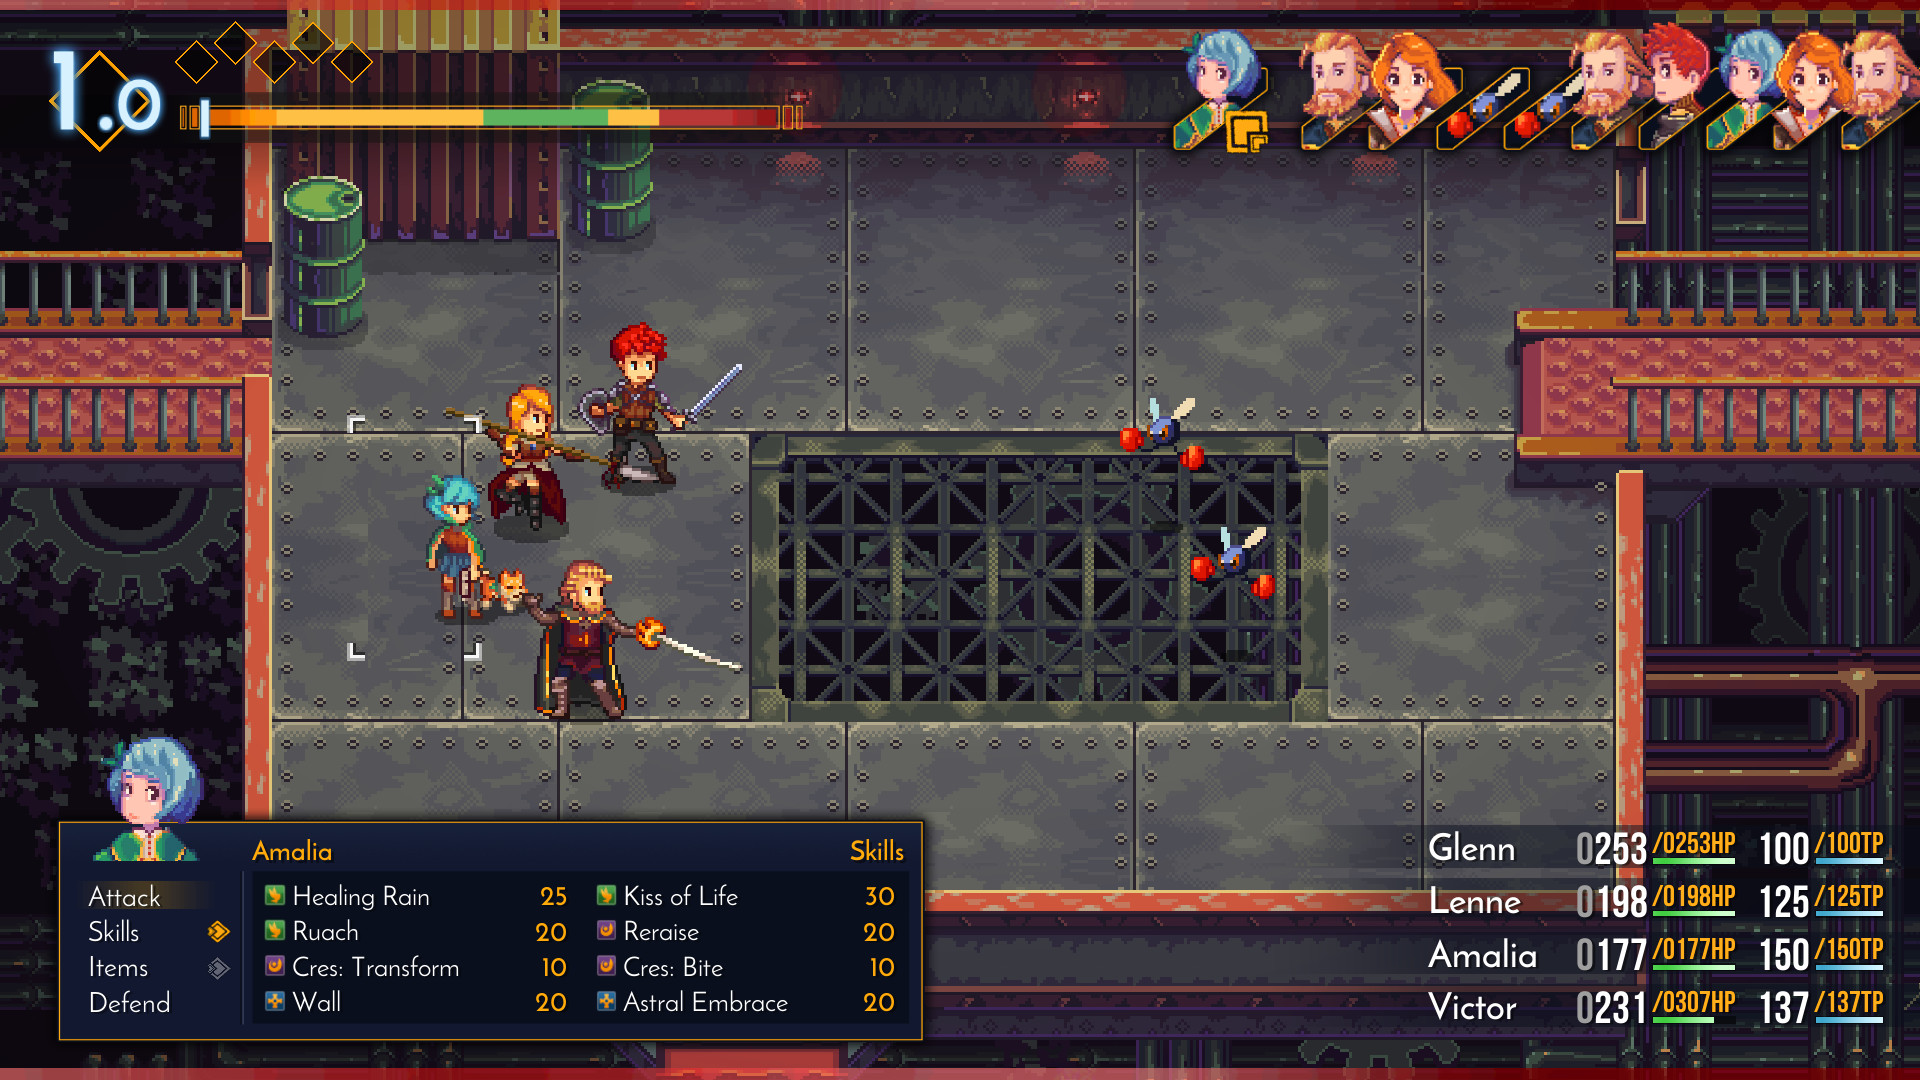 Classic JRPG Fans Should Keep an Eye on Chained Echoes, Journeying